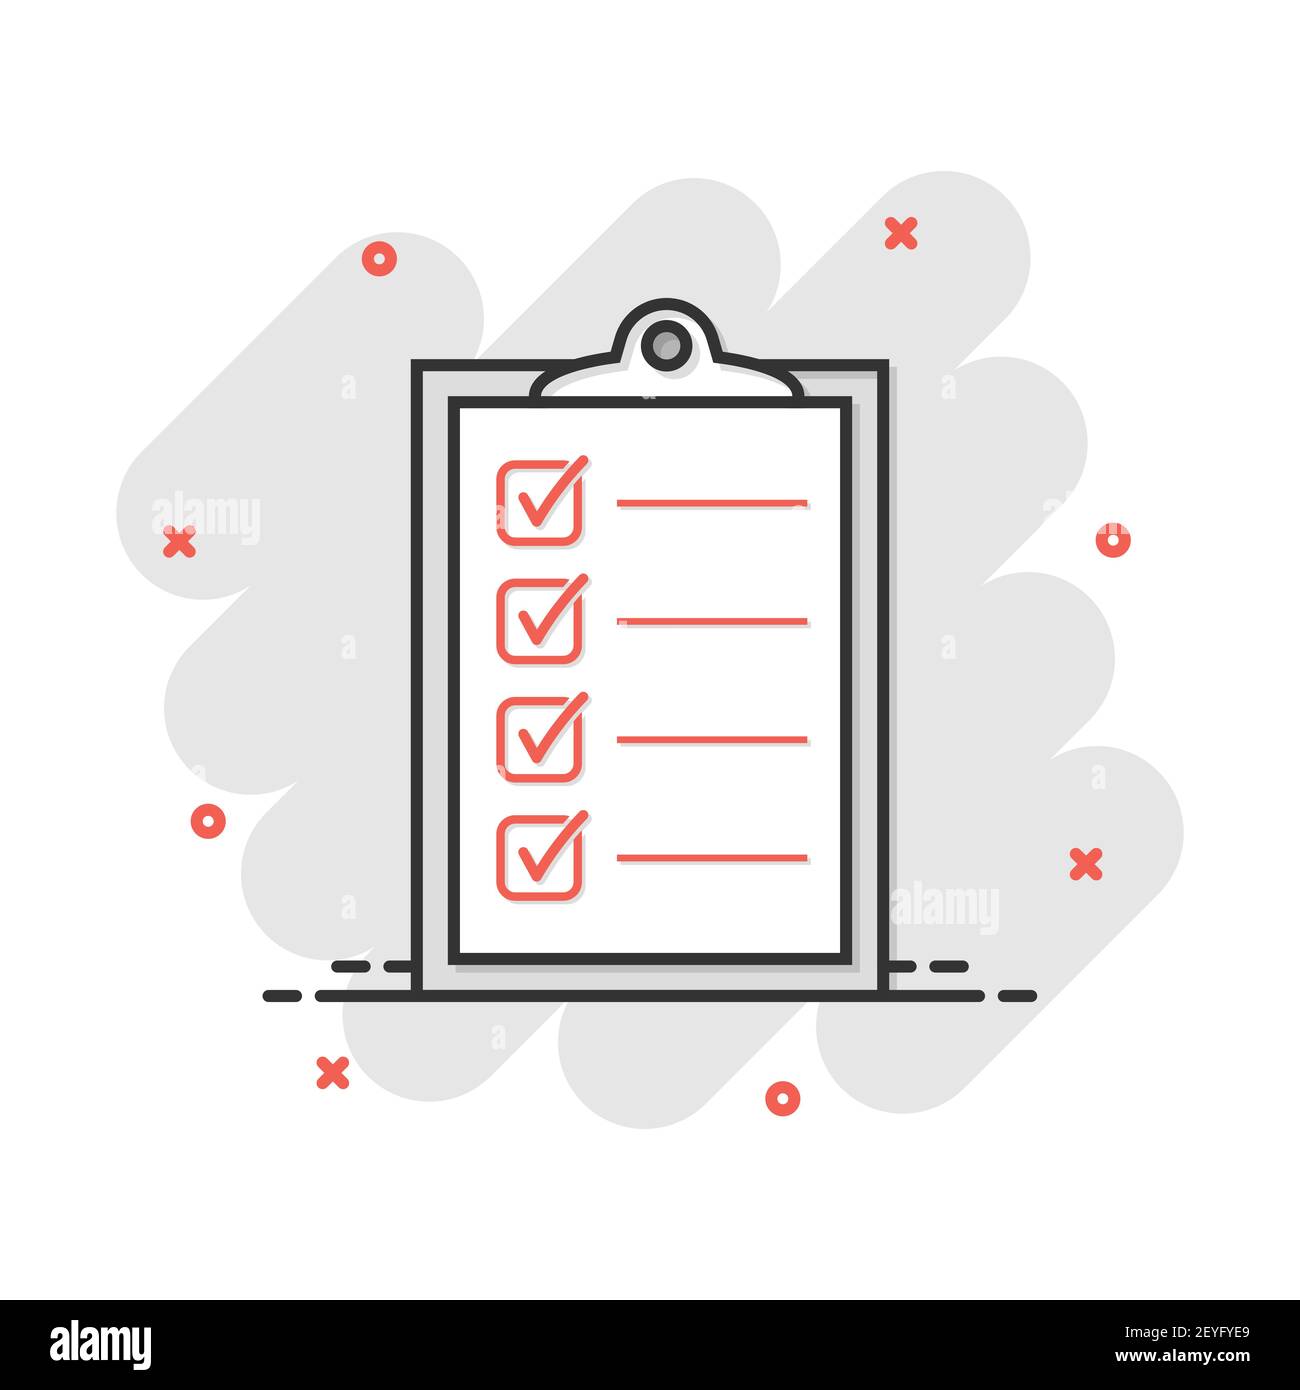 Vector cartoon to do list icon in comic style. Checklist, task list sign illustration pictogram. Reminder business splash effect concept. Stock Vector